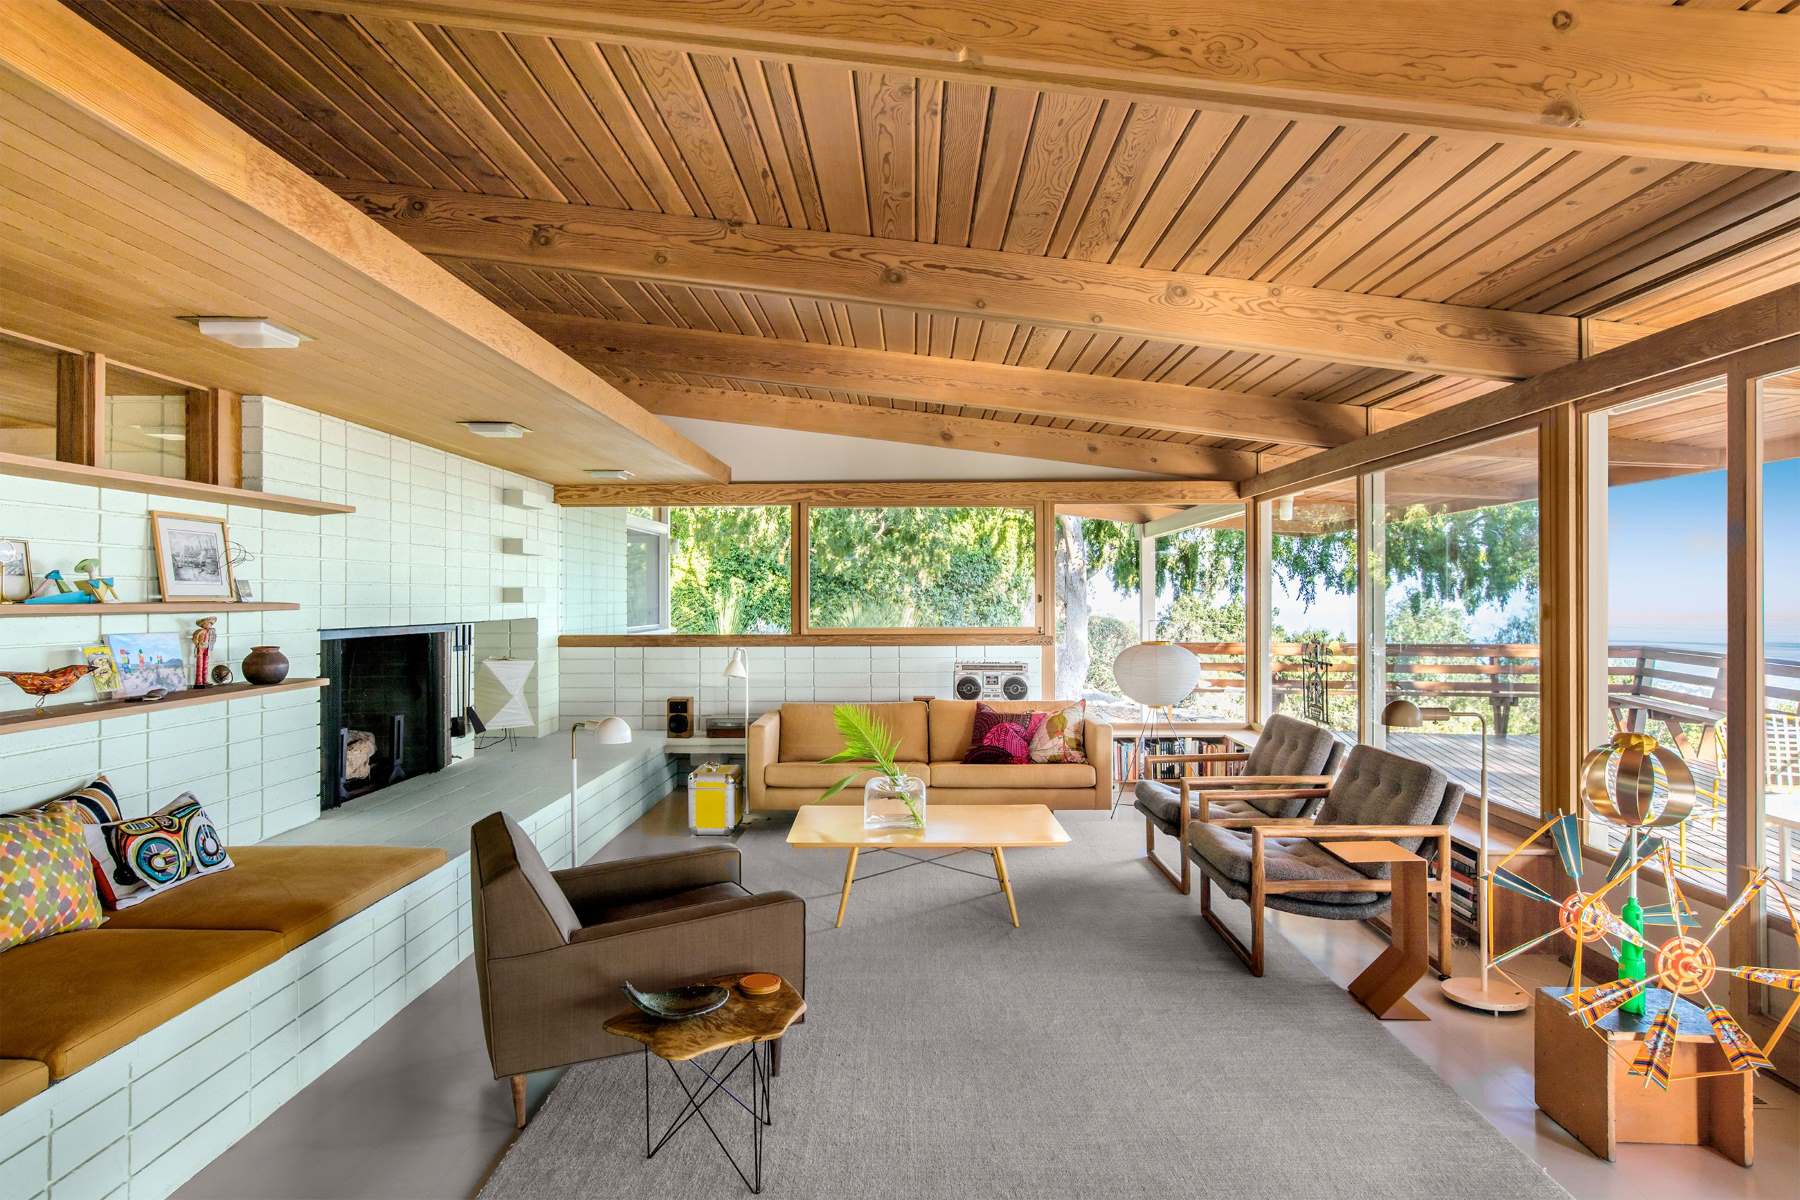 How To Add Mid-Century Styling To Design House